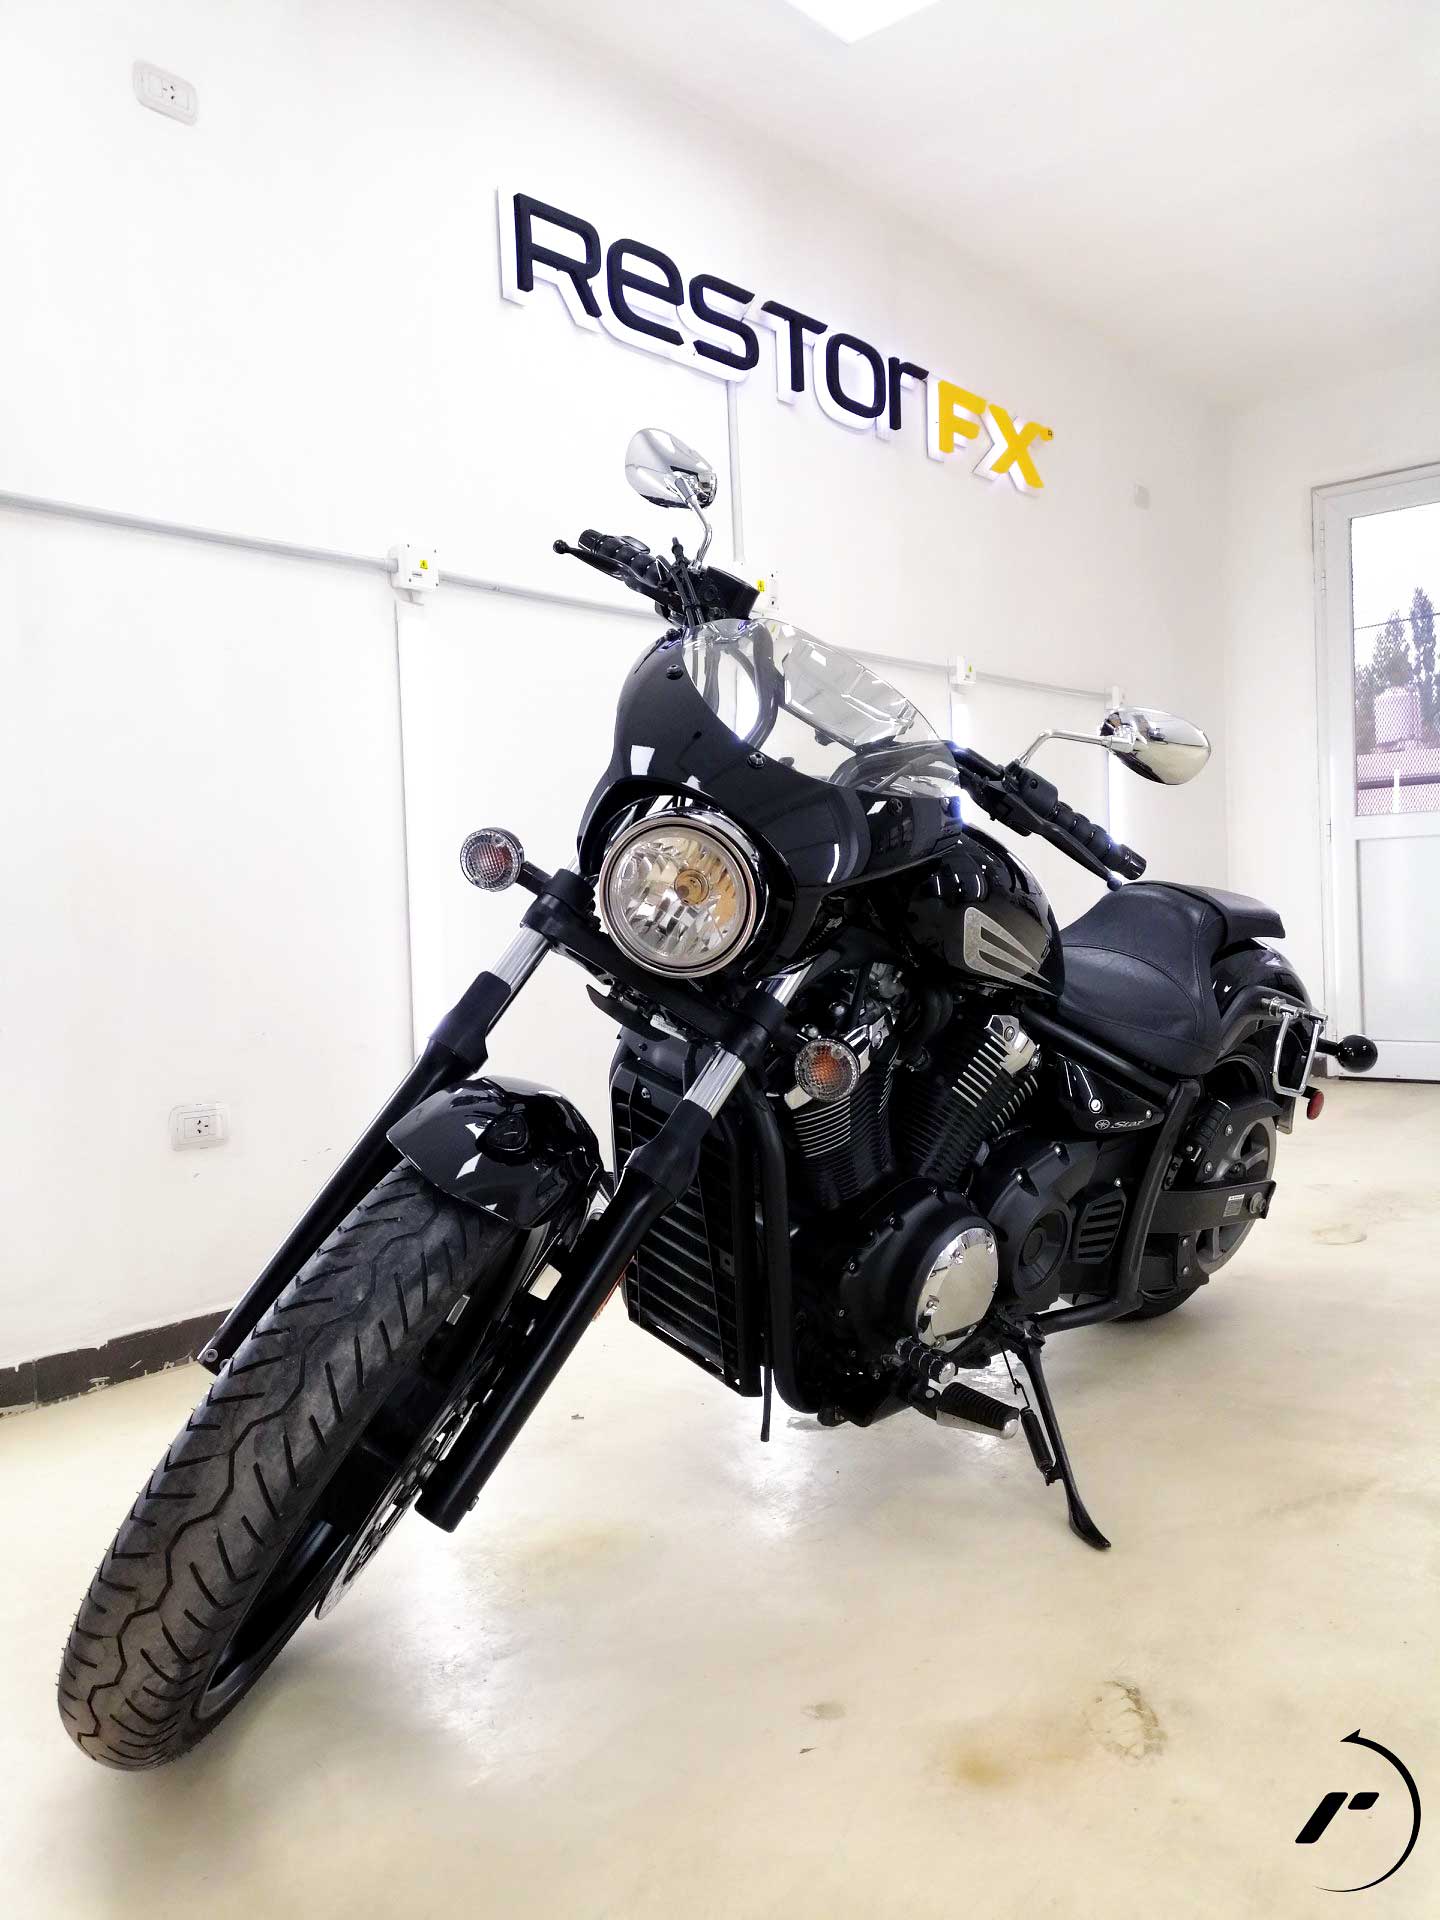 Shiny black motorcycle at RestorFX Comodoro with white wall, lights and branded signage in the back